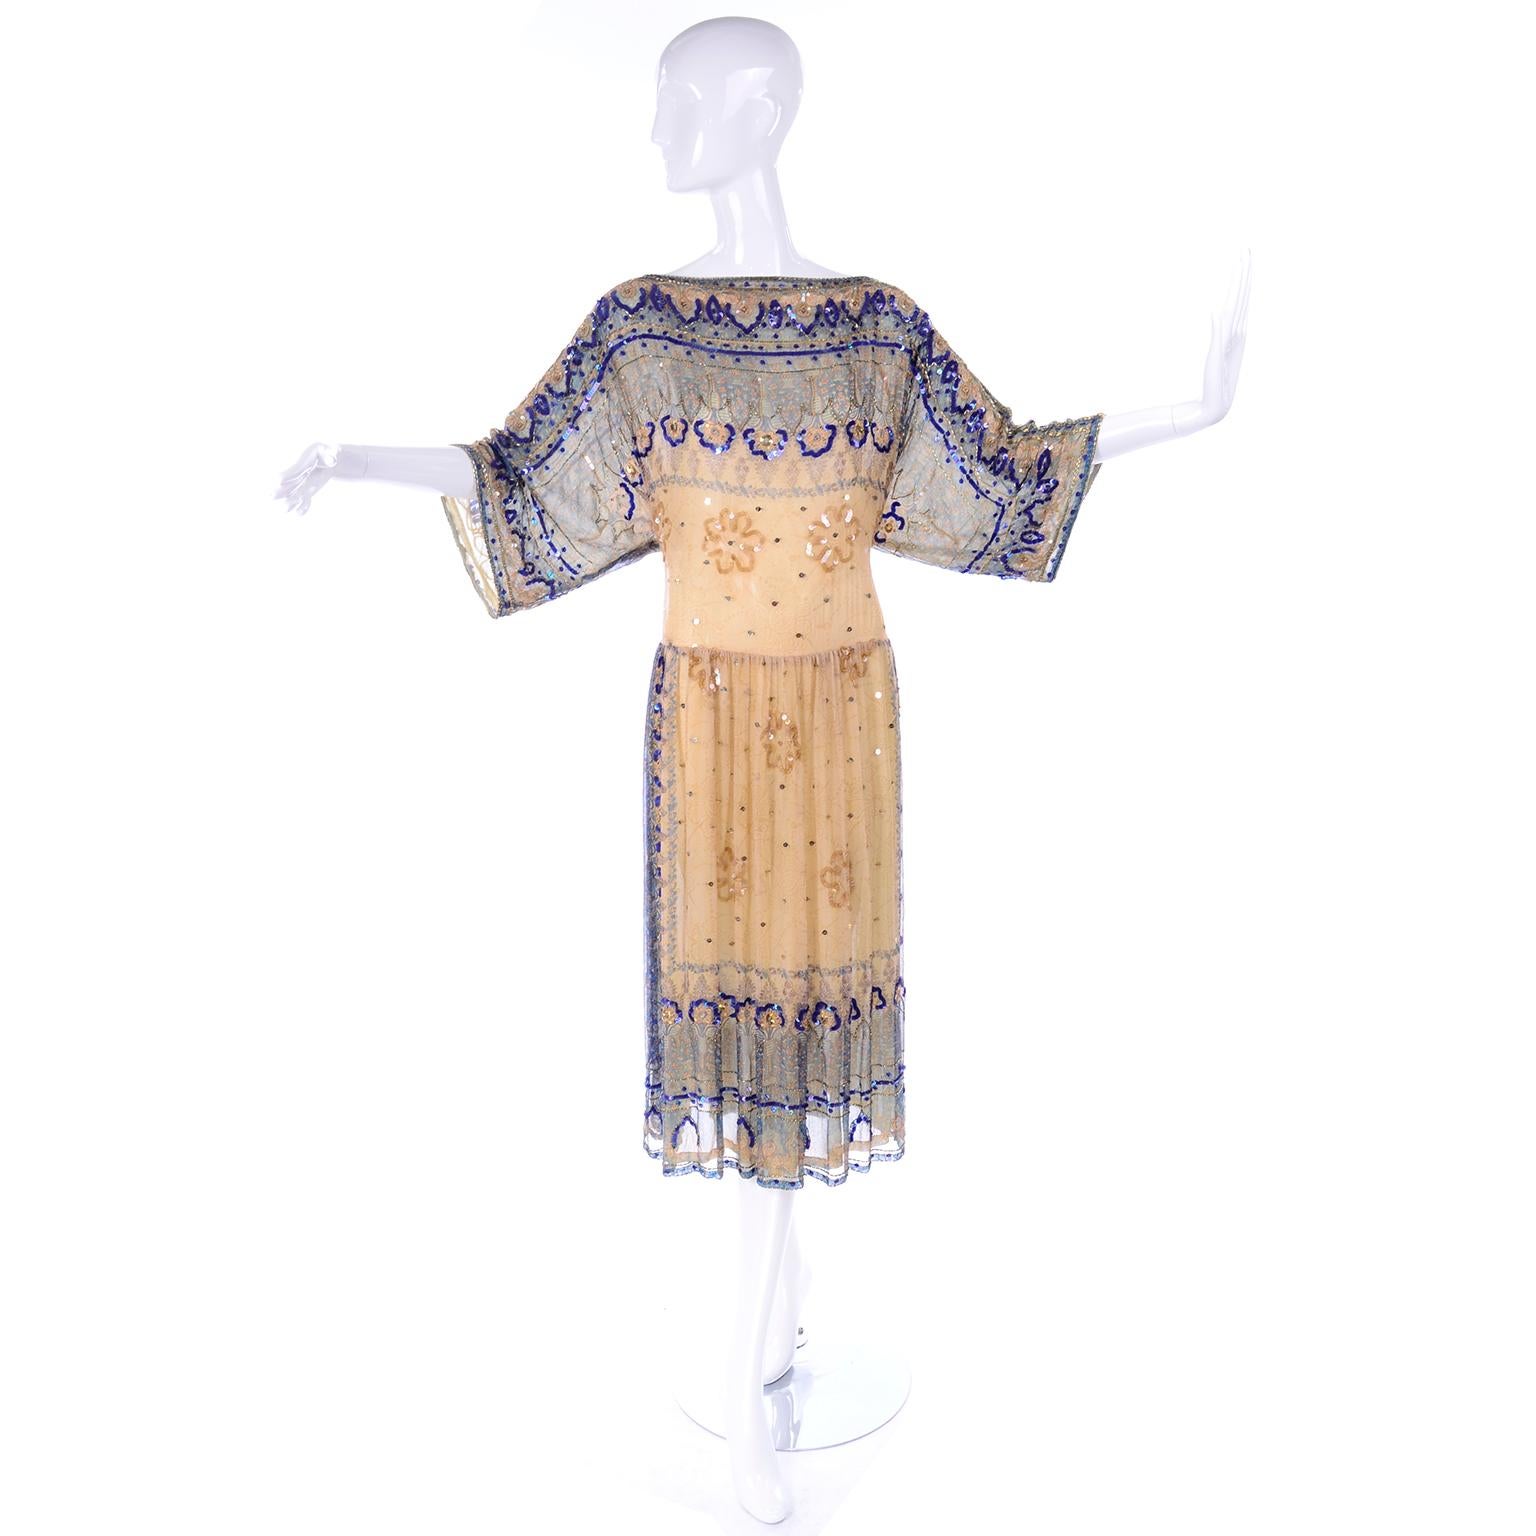 This is an exquisitely made Judith Ann Creations vintage dress made in the late 1970's or early 1980's in a 1920's style! The fabric is a beautiful tan and blue patterned fine silk, and the dress is covered in gold and blue sequins and beads. It is